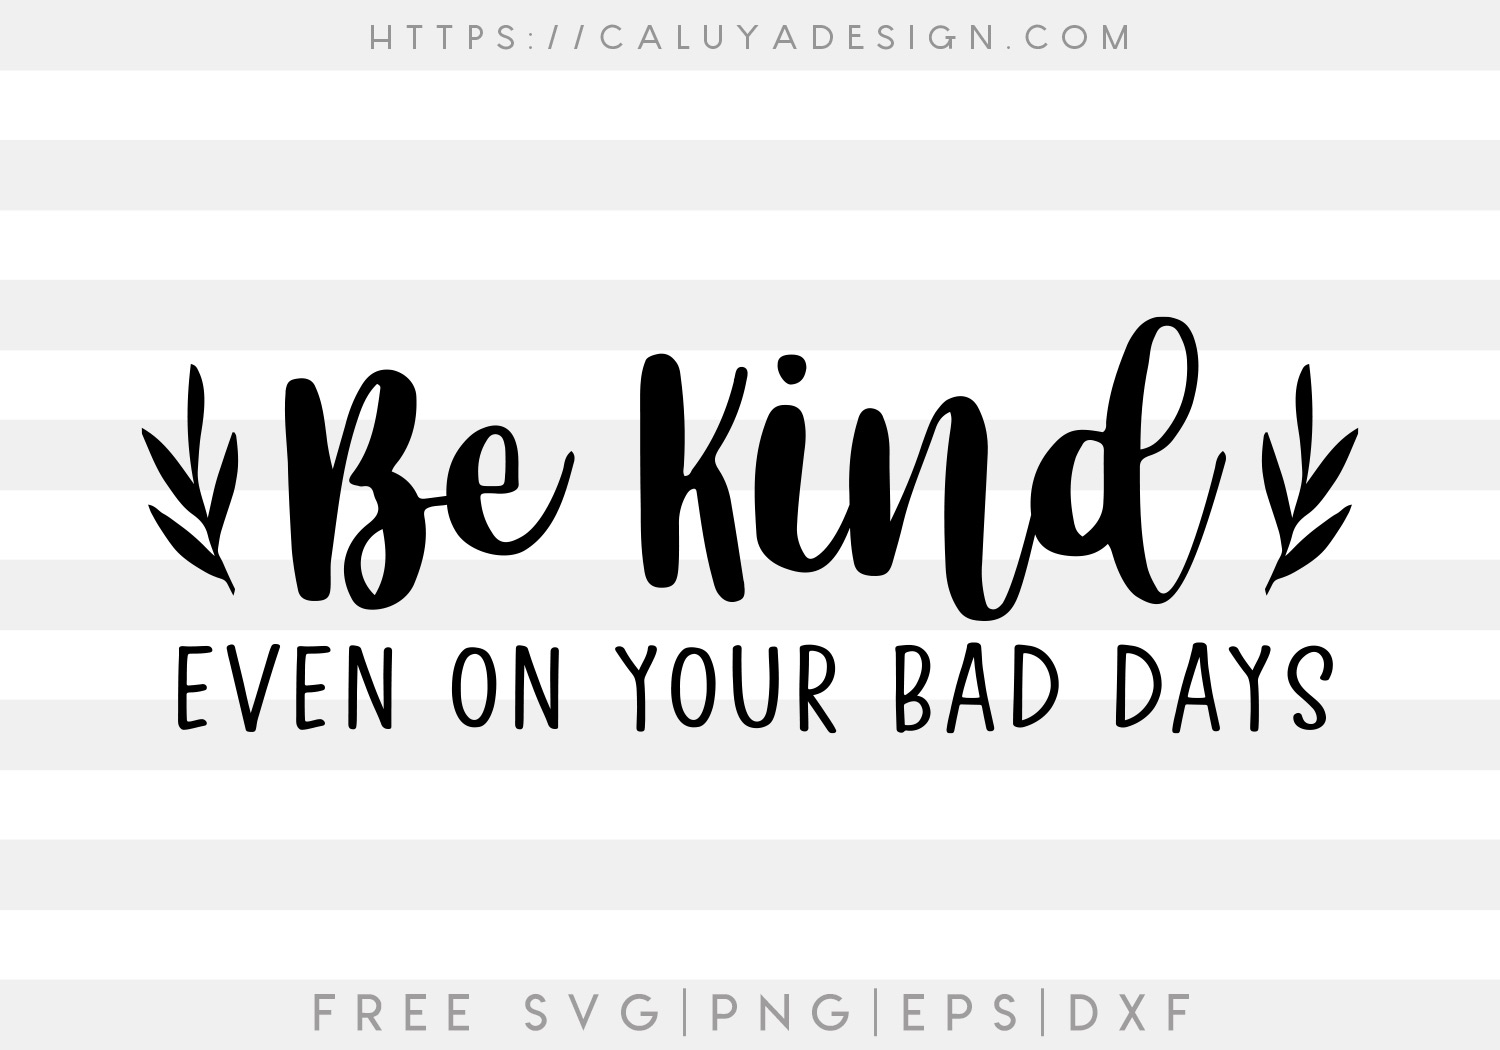 Be Kind, Even On Your Bad Days SVG, PNG, EPS & DXF